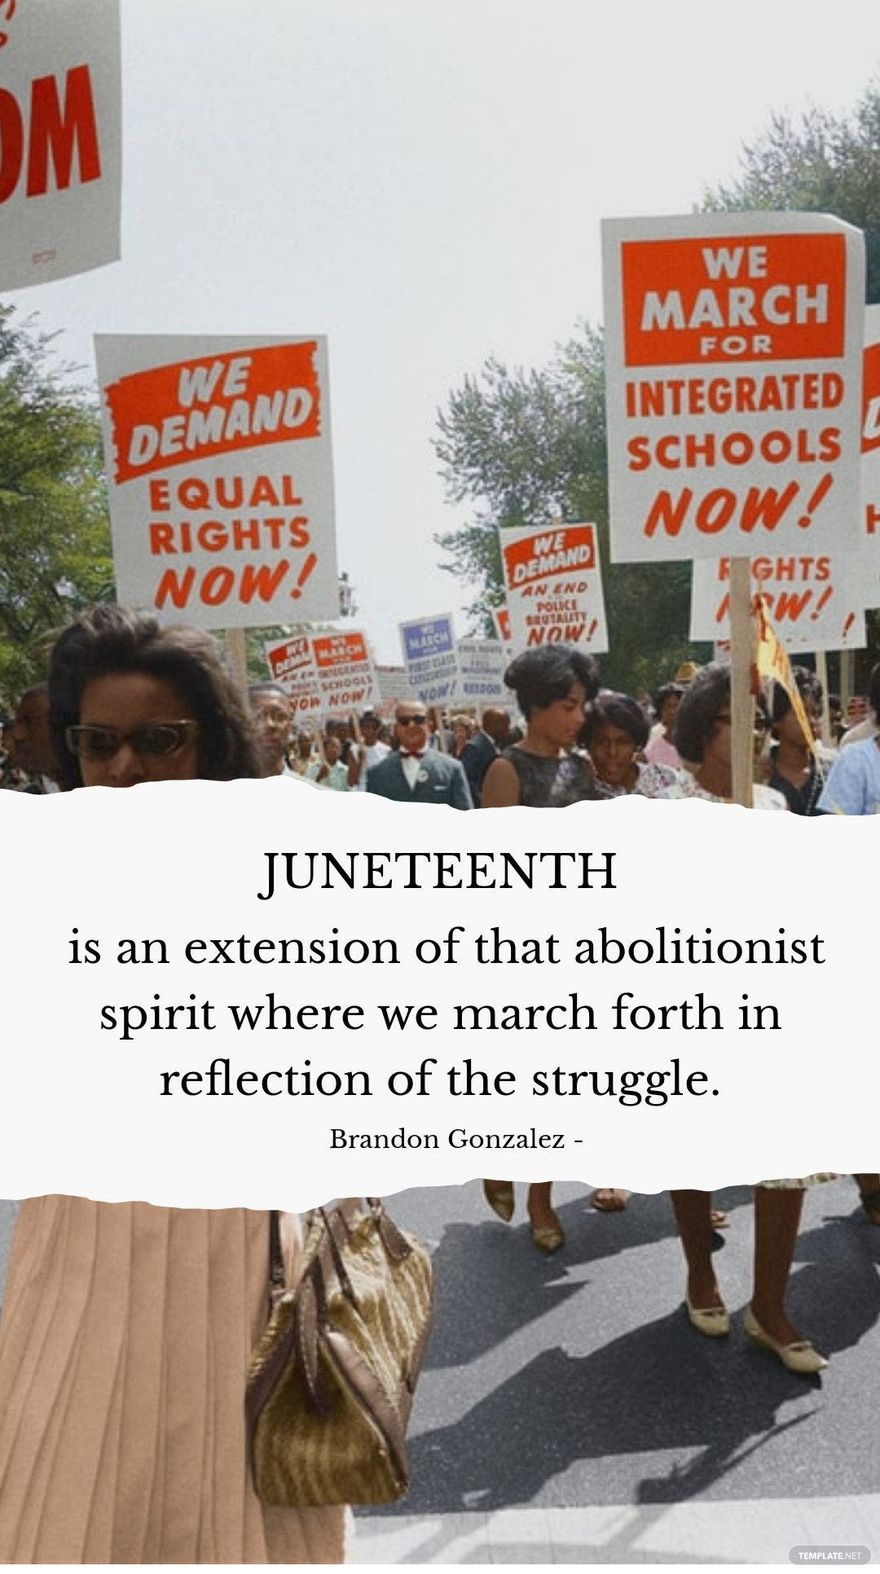 Free Brandon Gonzalez - Juneteenth is an extension of that abolitionist spirit where we march forth in reflection of the struggle. in JPG